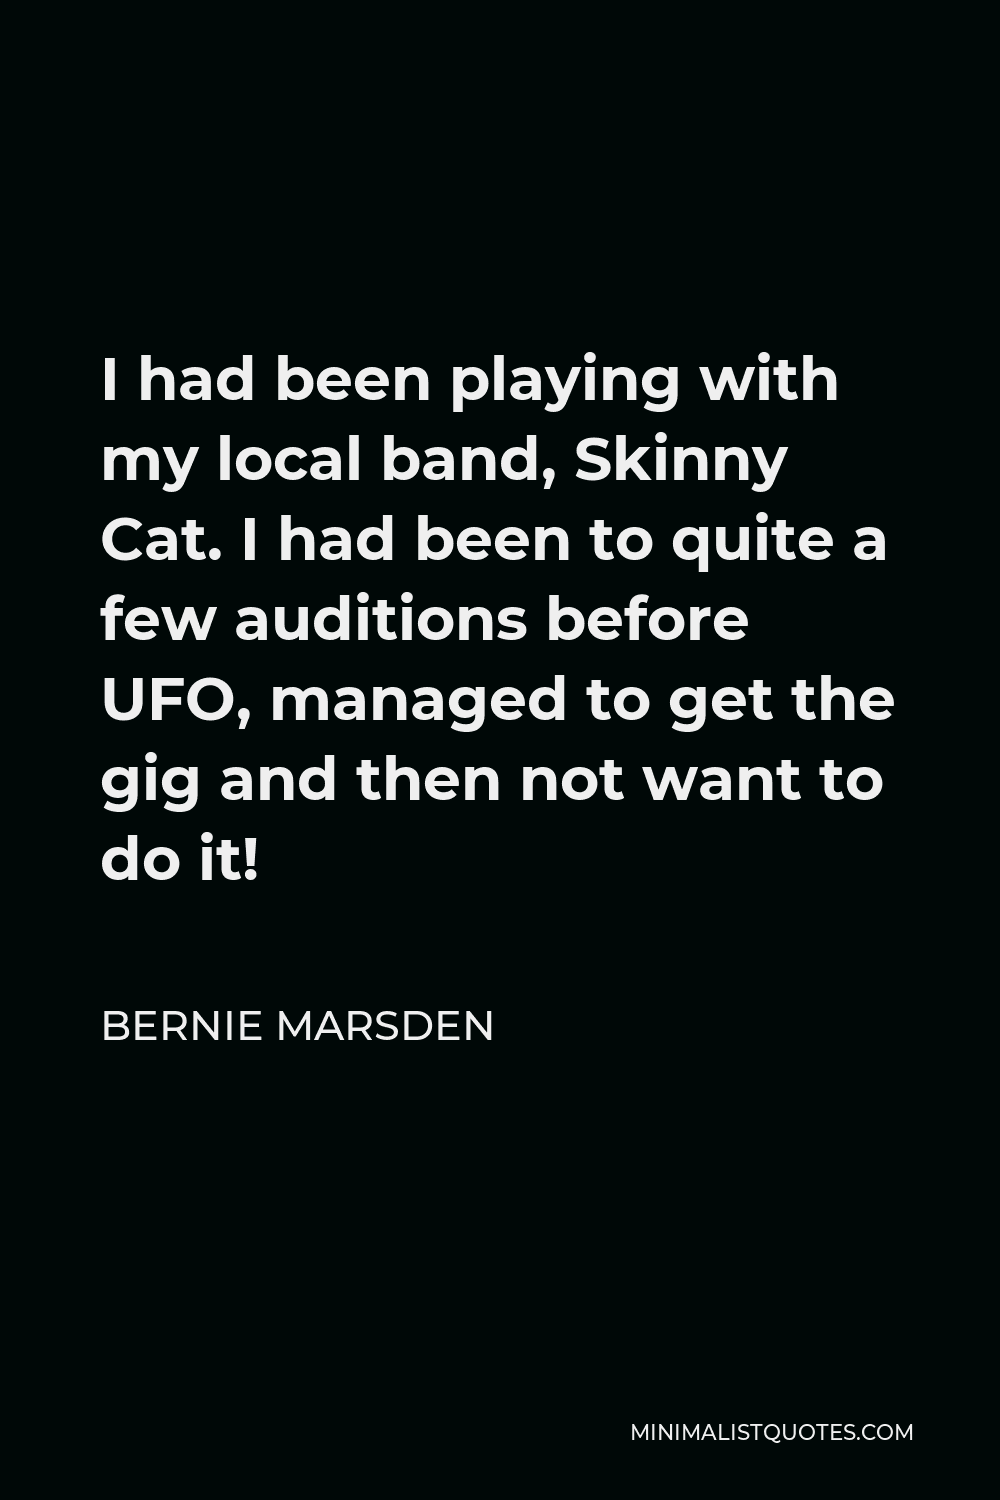 Bernie Marsden Quote - I had been playing with my local band, Skinny Cat. I had been to quite a few auditions before UFO, managed to get the gig and then not want to do it!